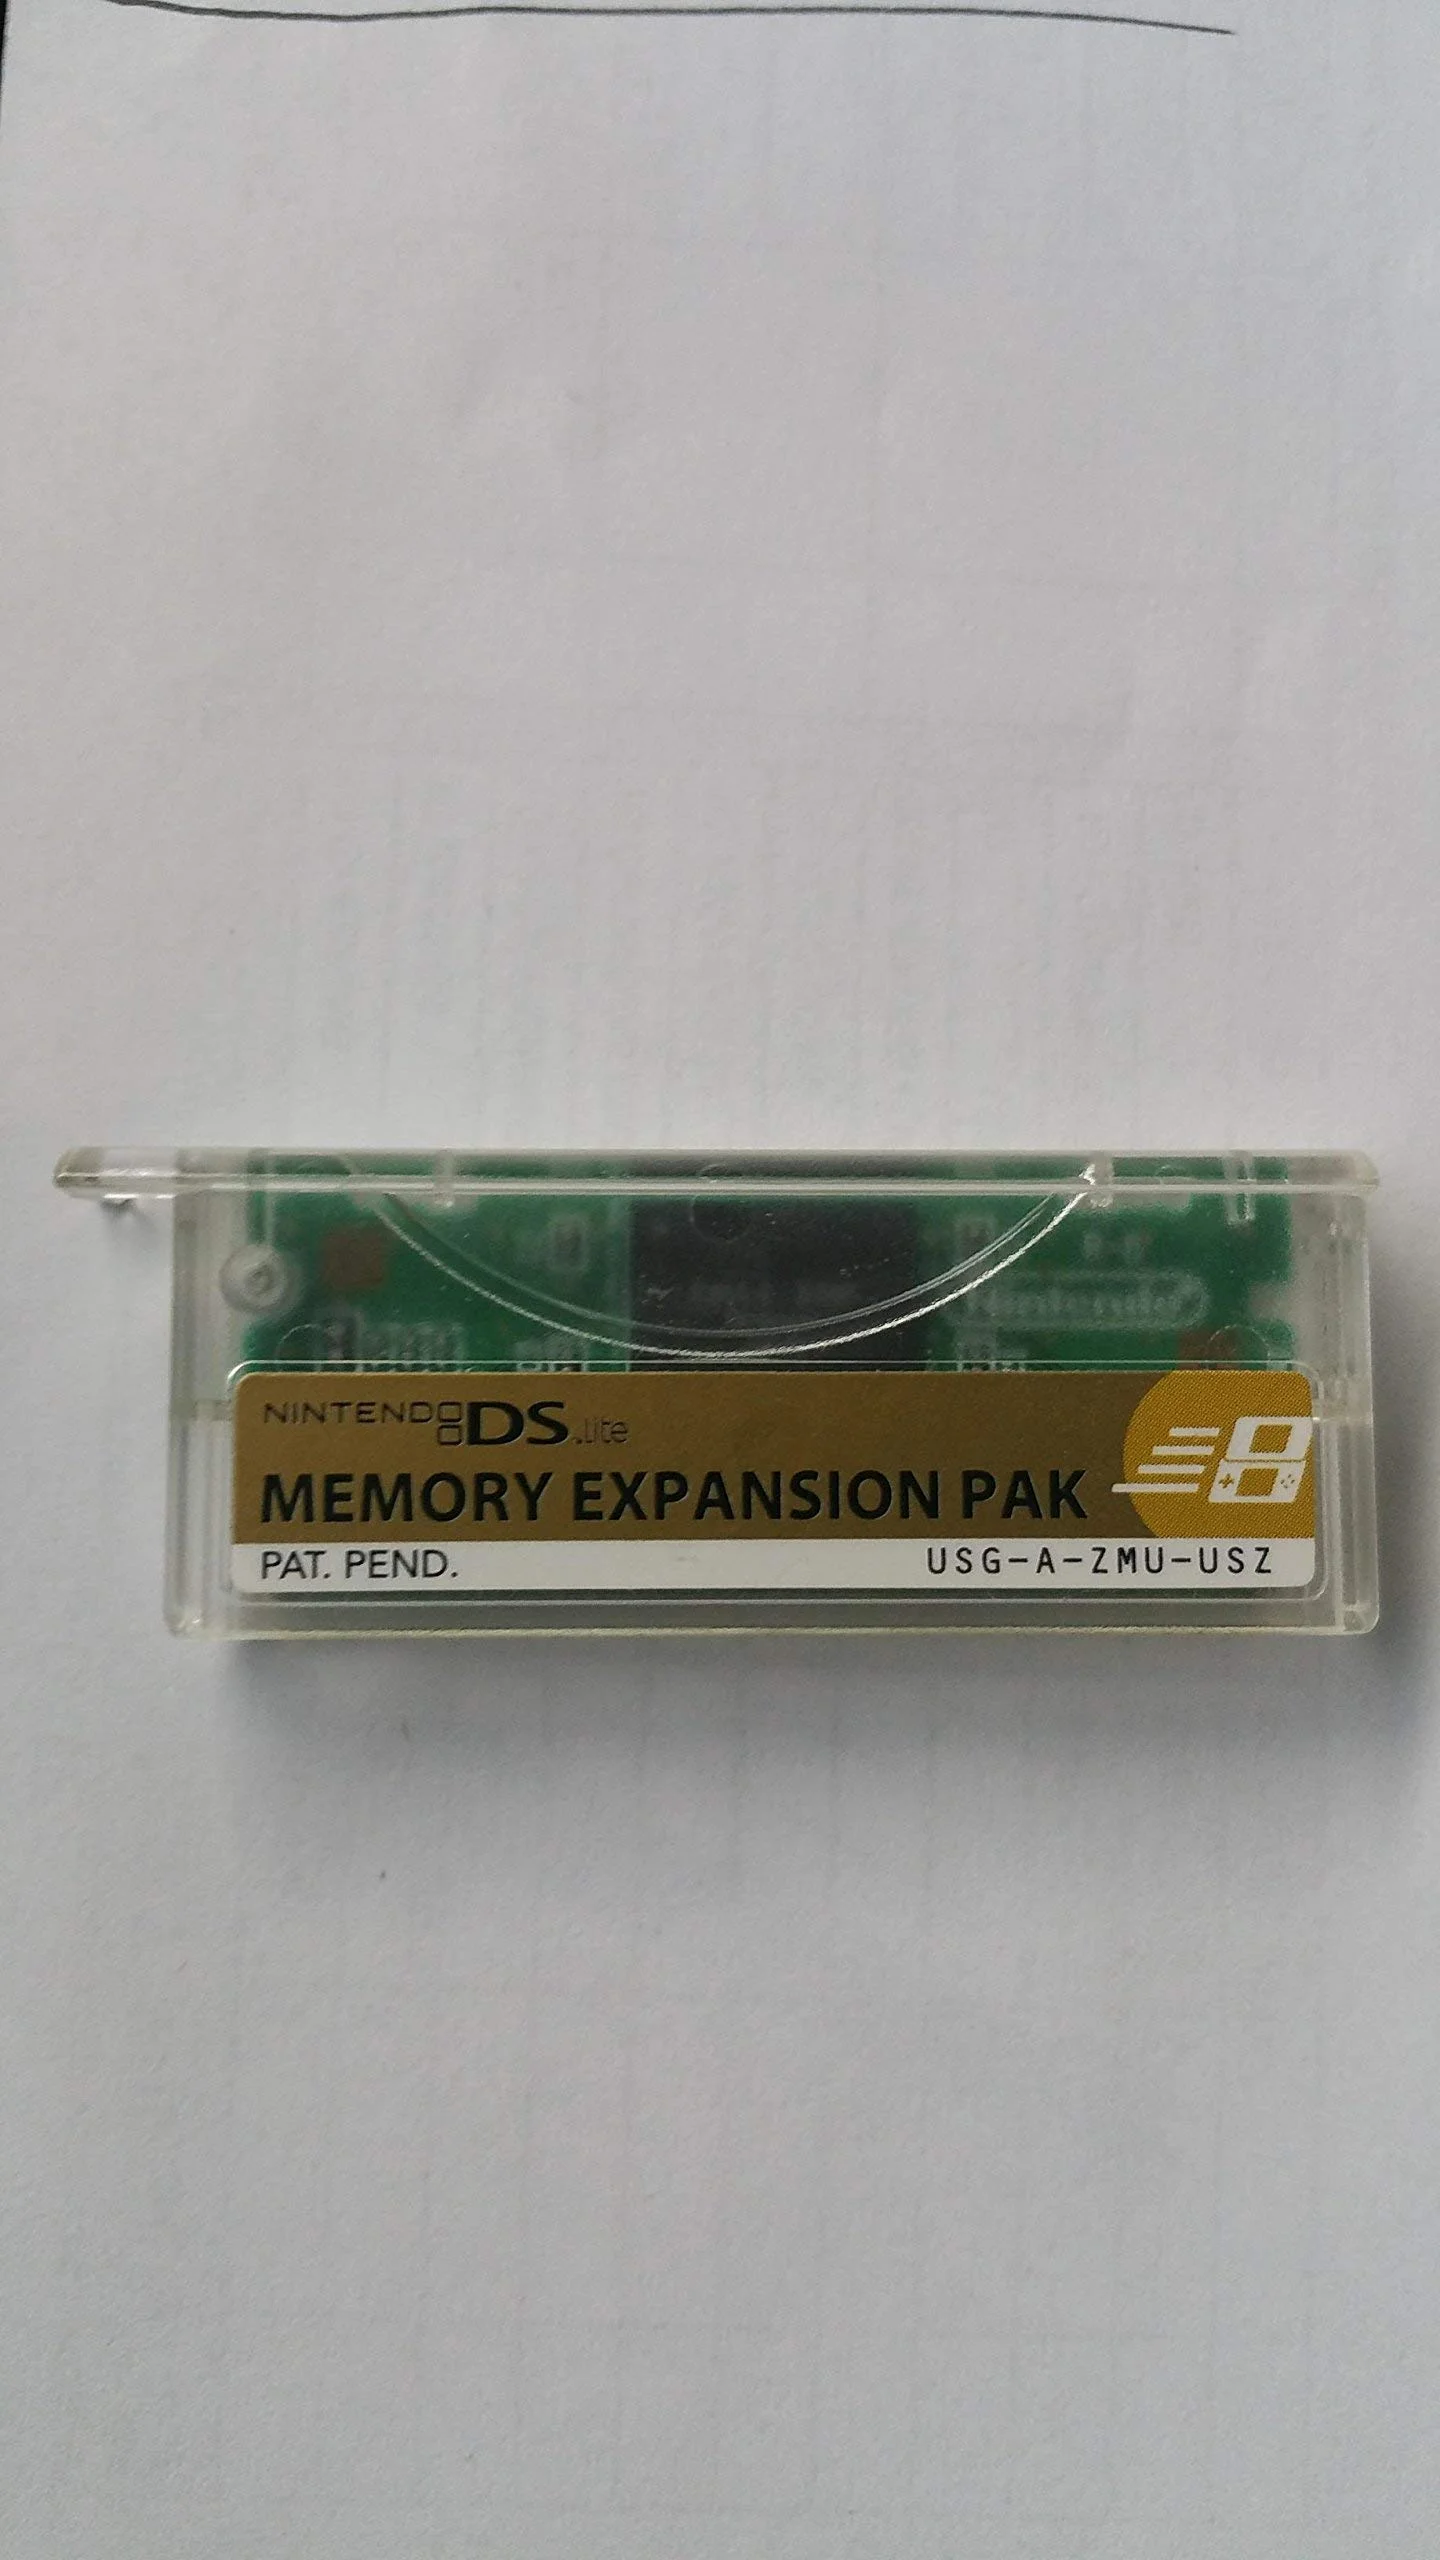  Nintendo DS Memory Expansion Pack